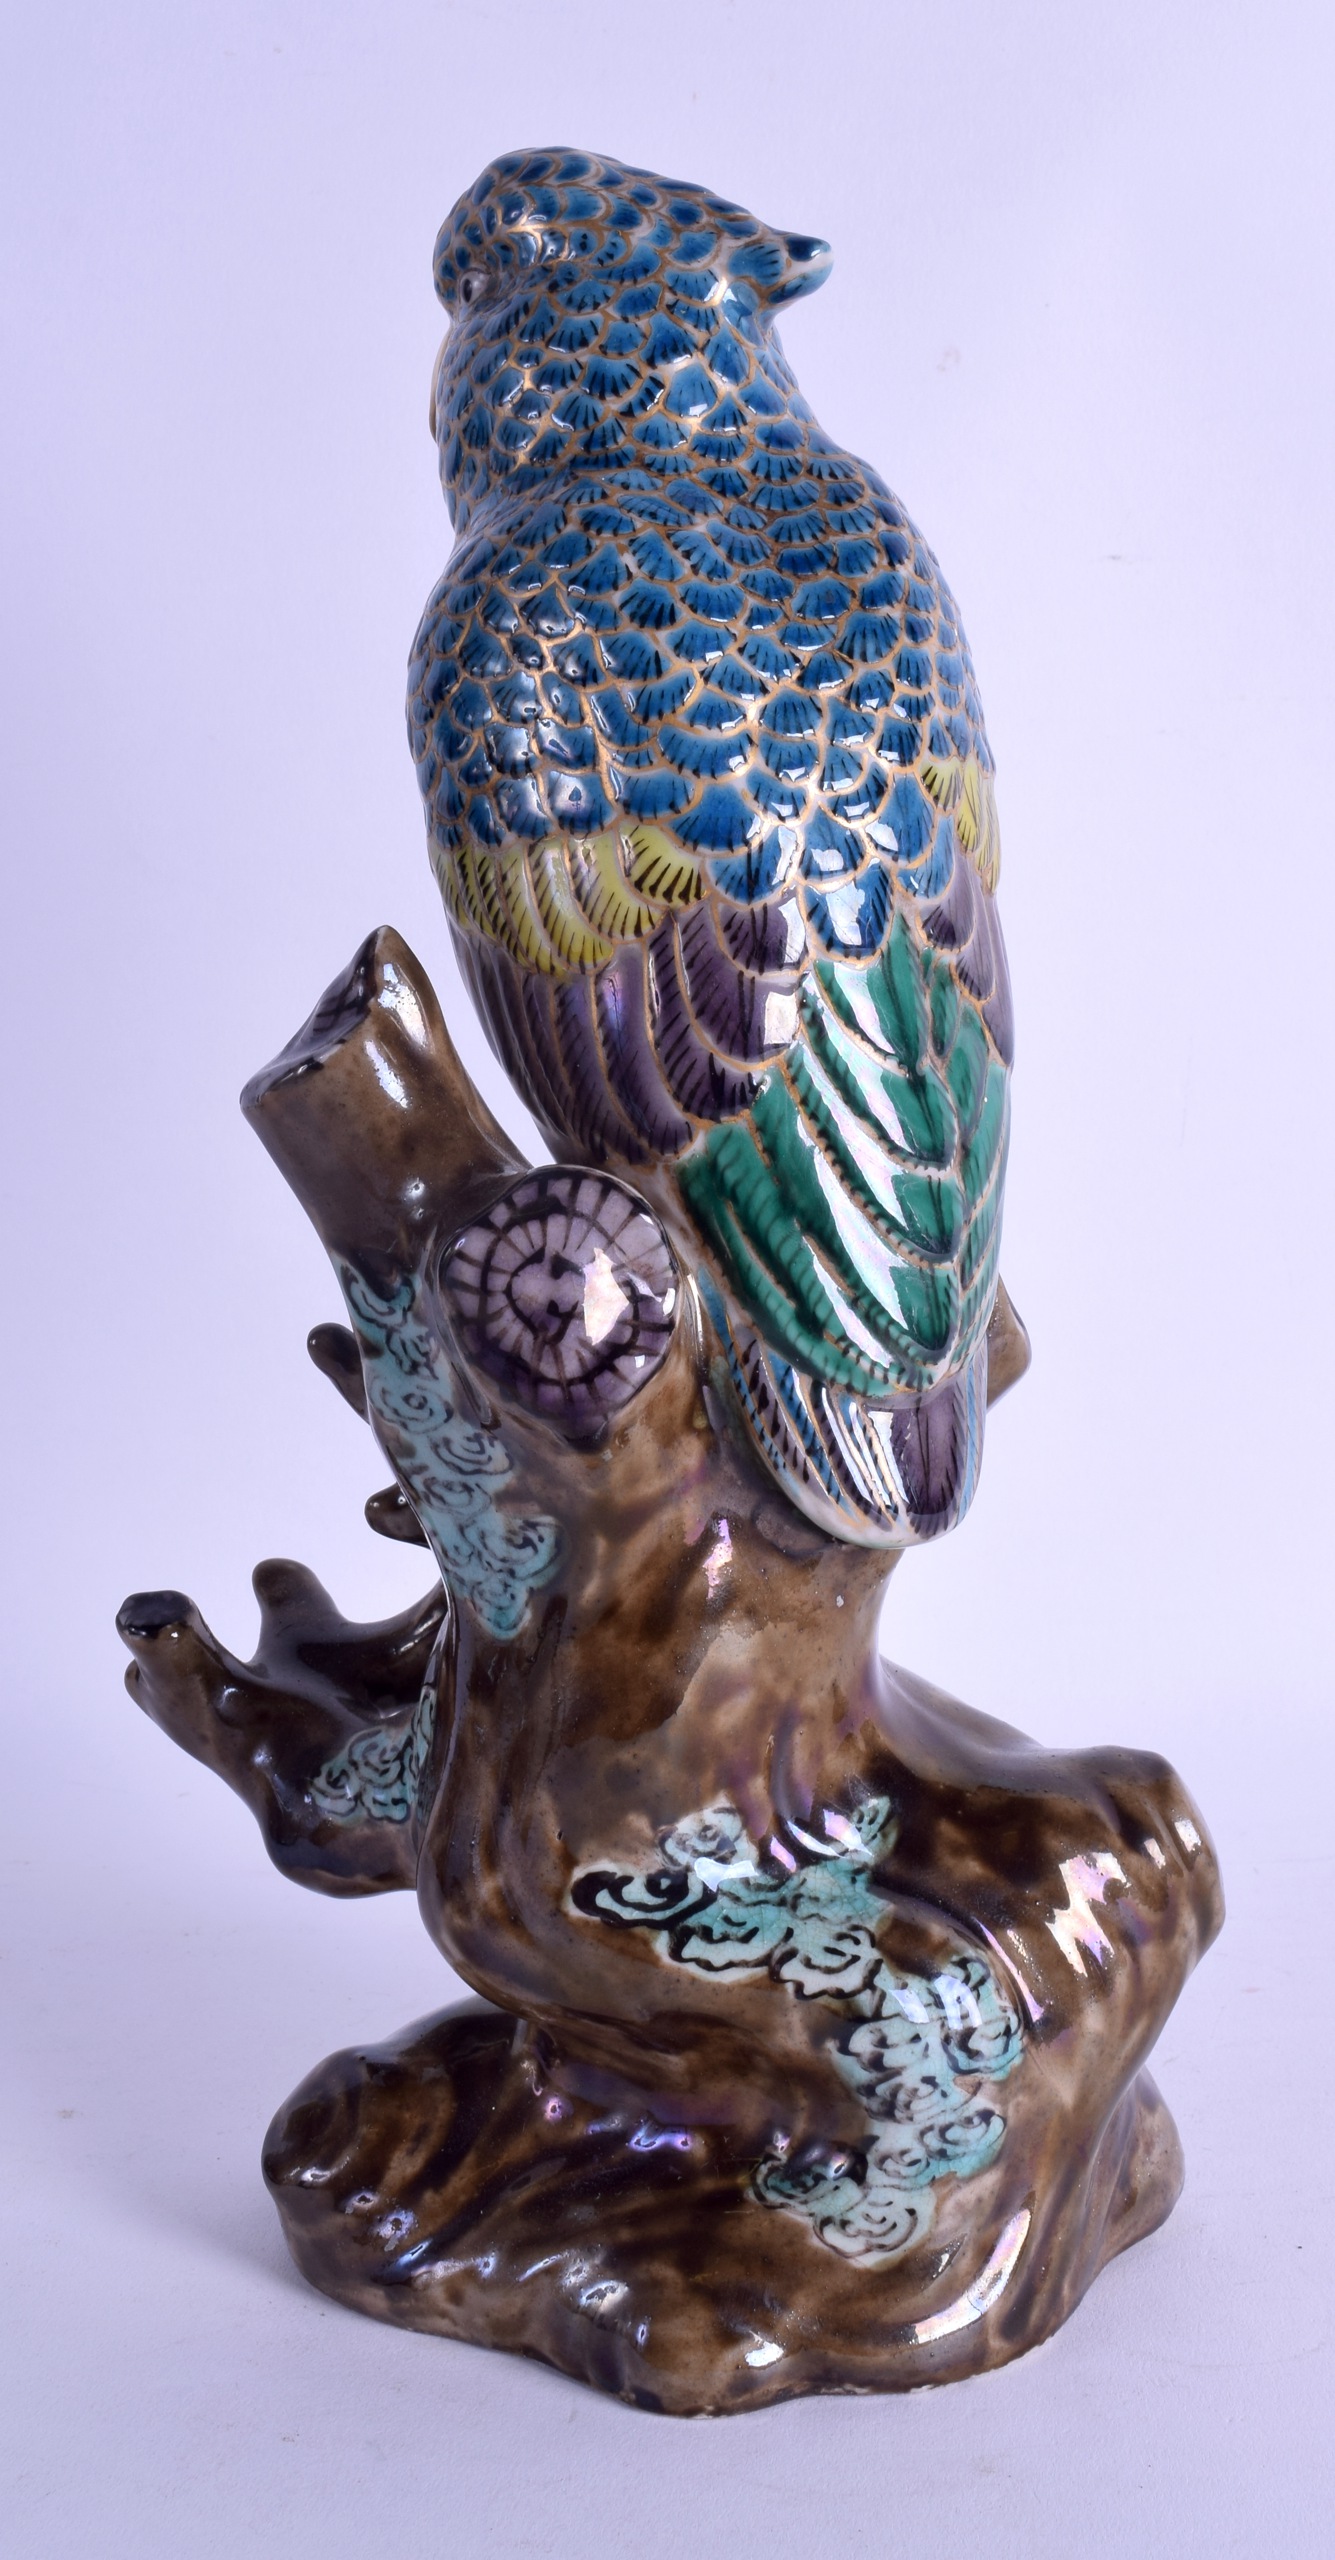 A RARE 19TH CENTURY JAPANESE AO KUTANI PORCELAIN FIGURE OF A PARROT modelled upon a naturalistic - Image 2 of 3